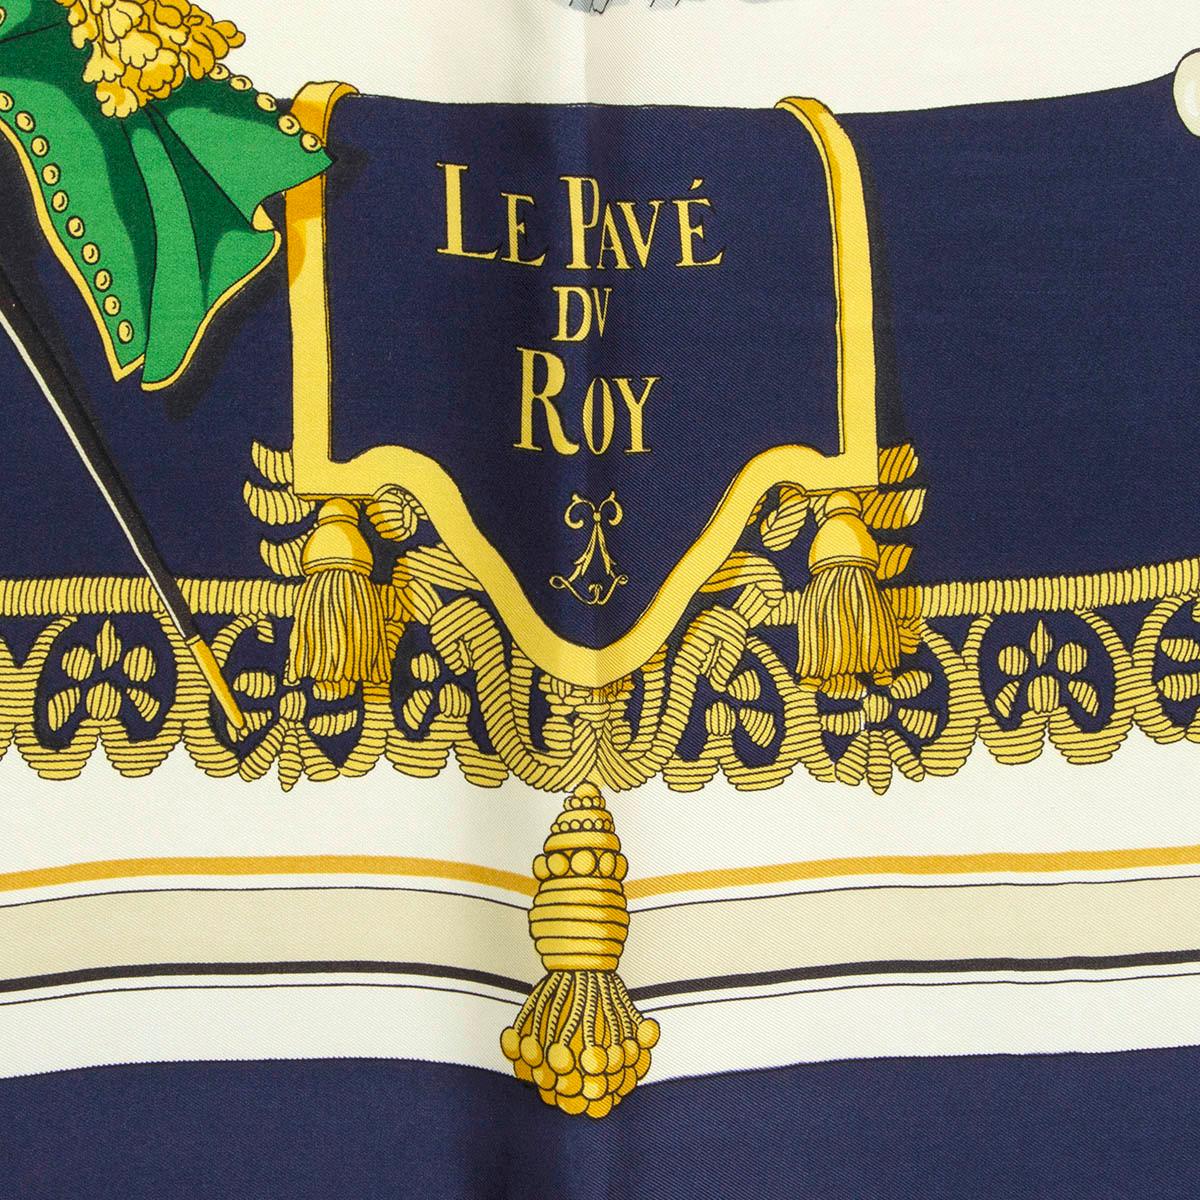 100% authentic Hermes 'Le Pavé Du Roy 90' scarf beige silk twill (100%) with navy blue border and details in antique gold, green and gray. Has been worn with faint marks through-out. Overall in good vintage condition.

Measurements
Width	90cm